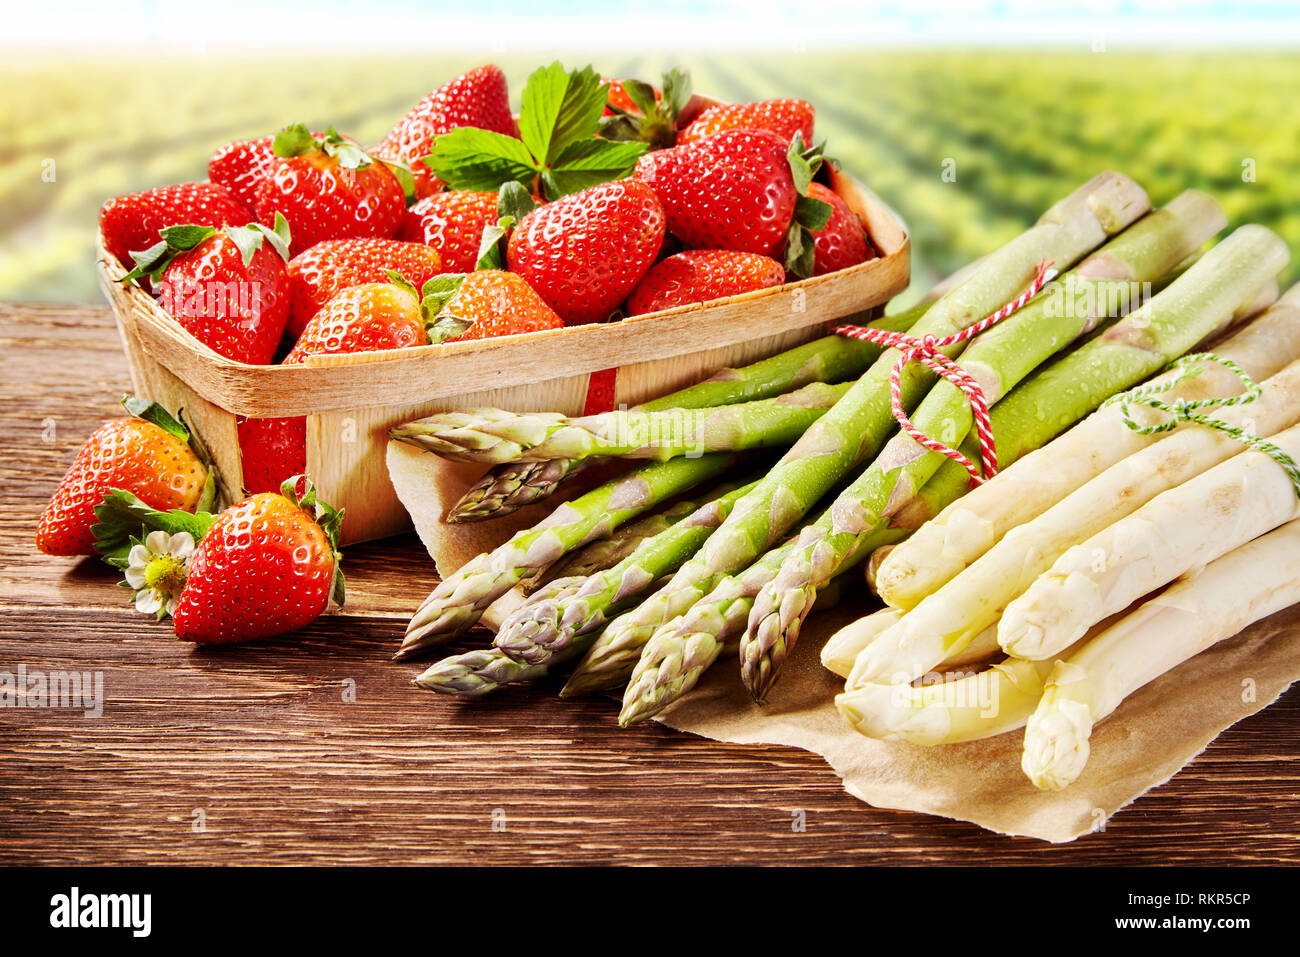 Fresh spring delicacies with white and green asparagus spears and a container of ripe red juicy strawberries outdoors on a farm or garden Stock Photo